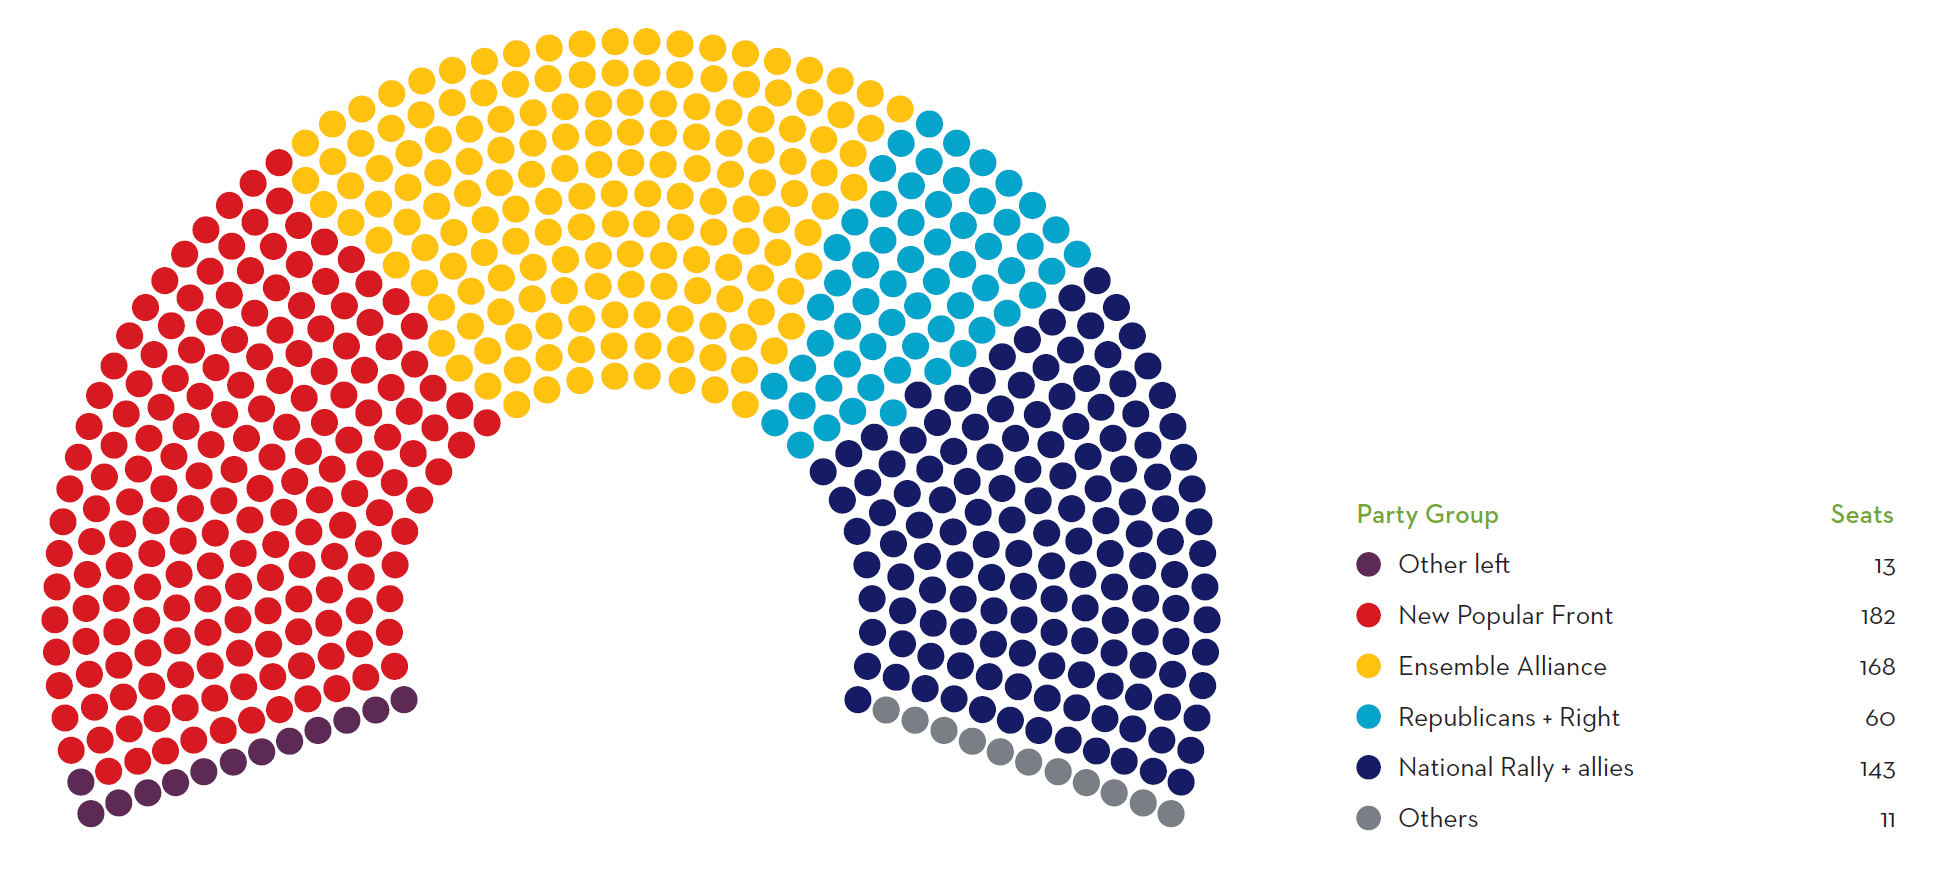 French national assembly of seats